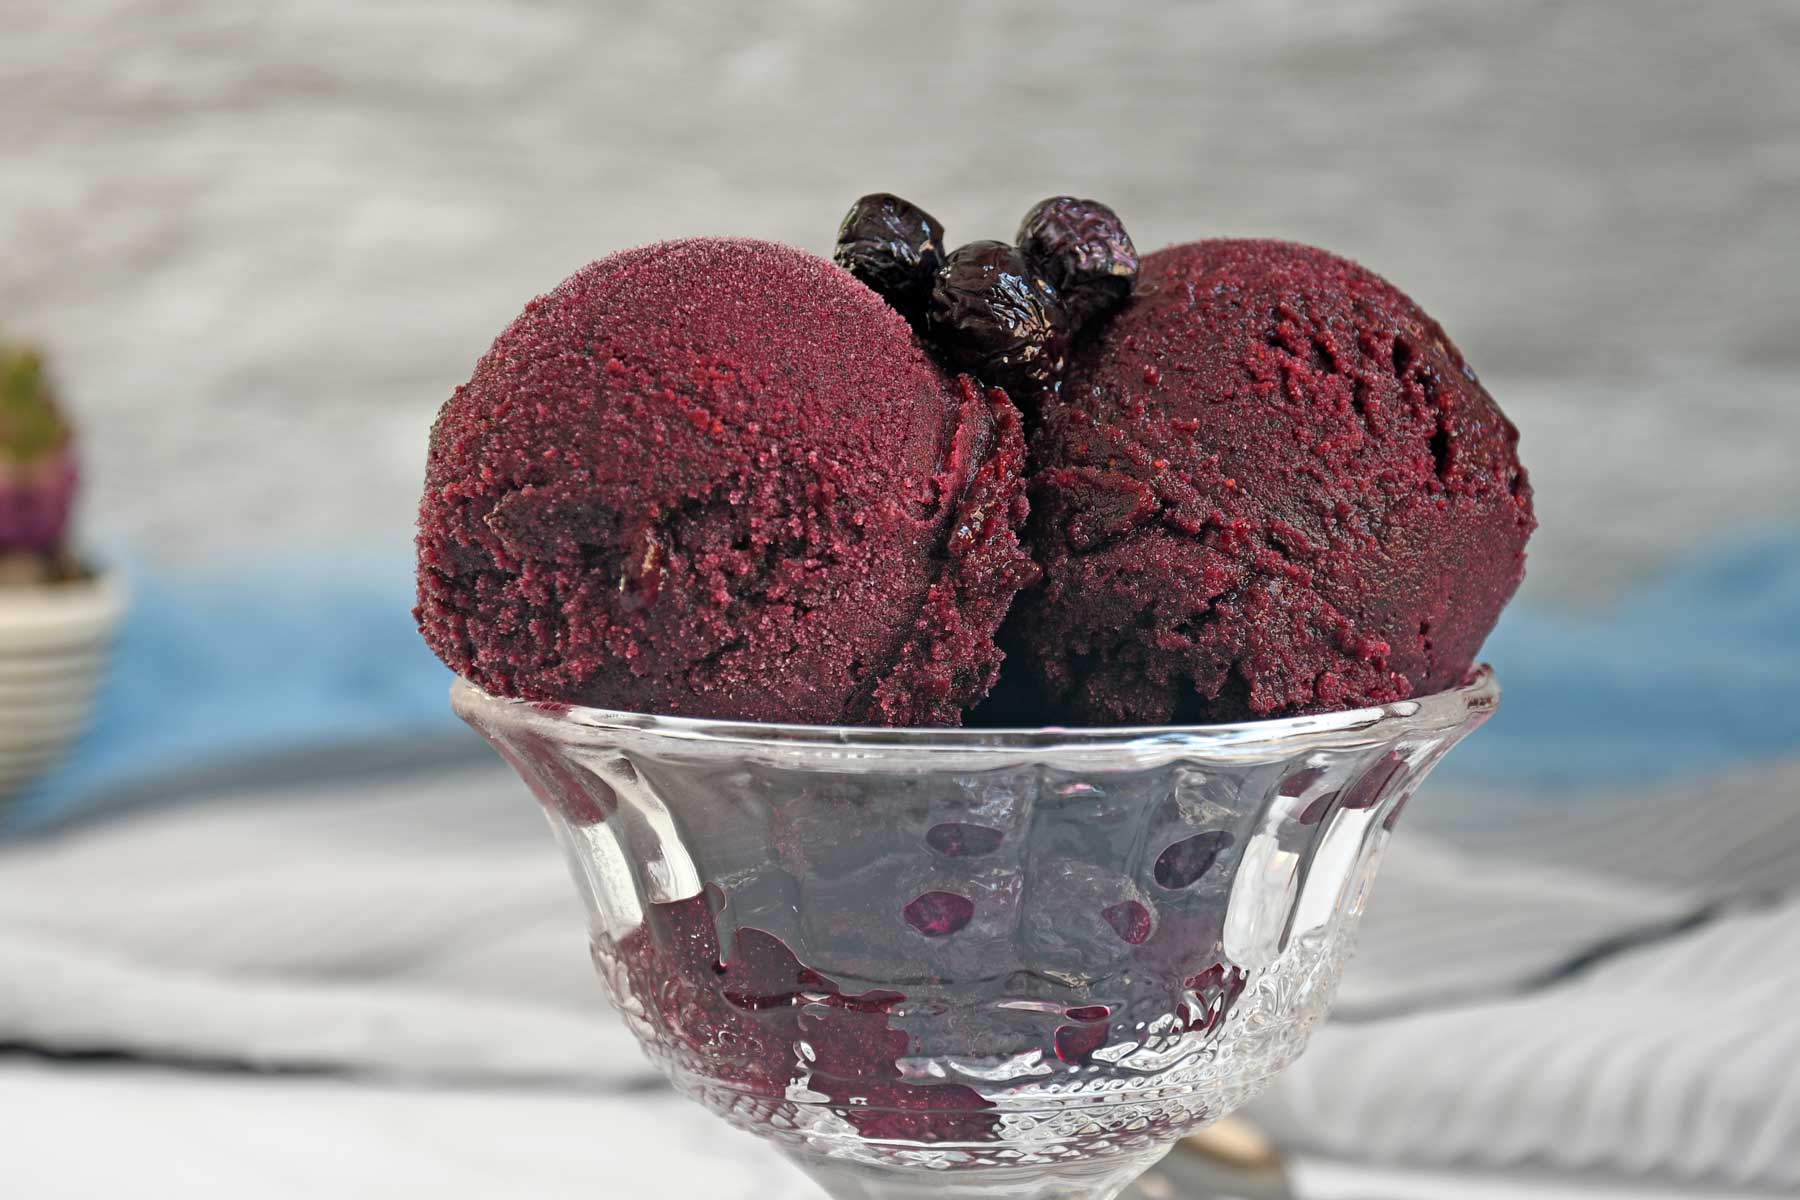 Blueberry Sorbet scoops in a glass bowl.